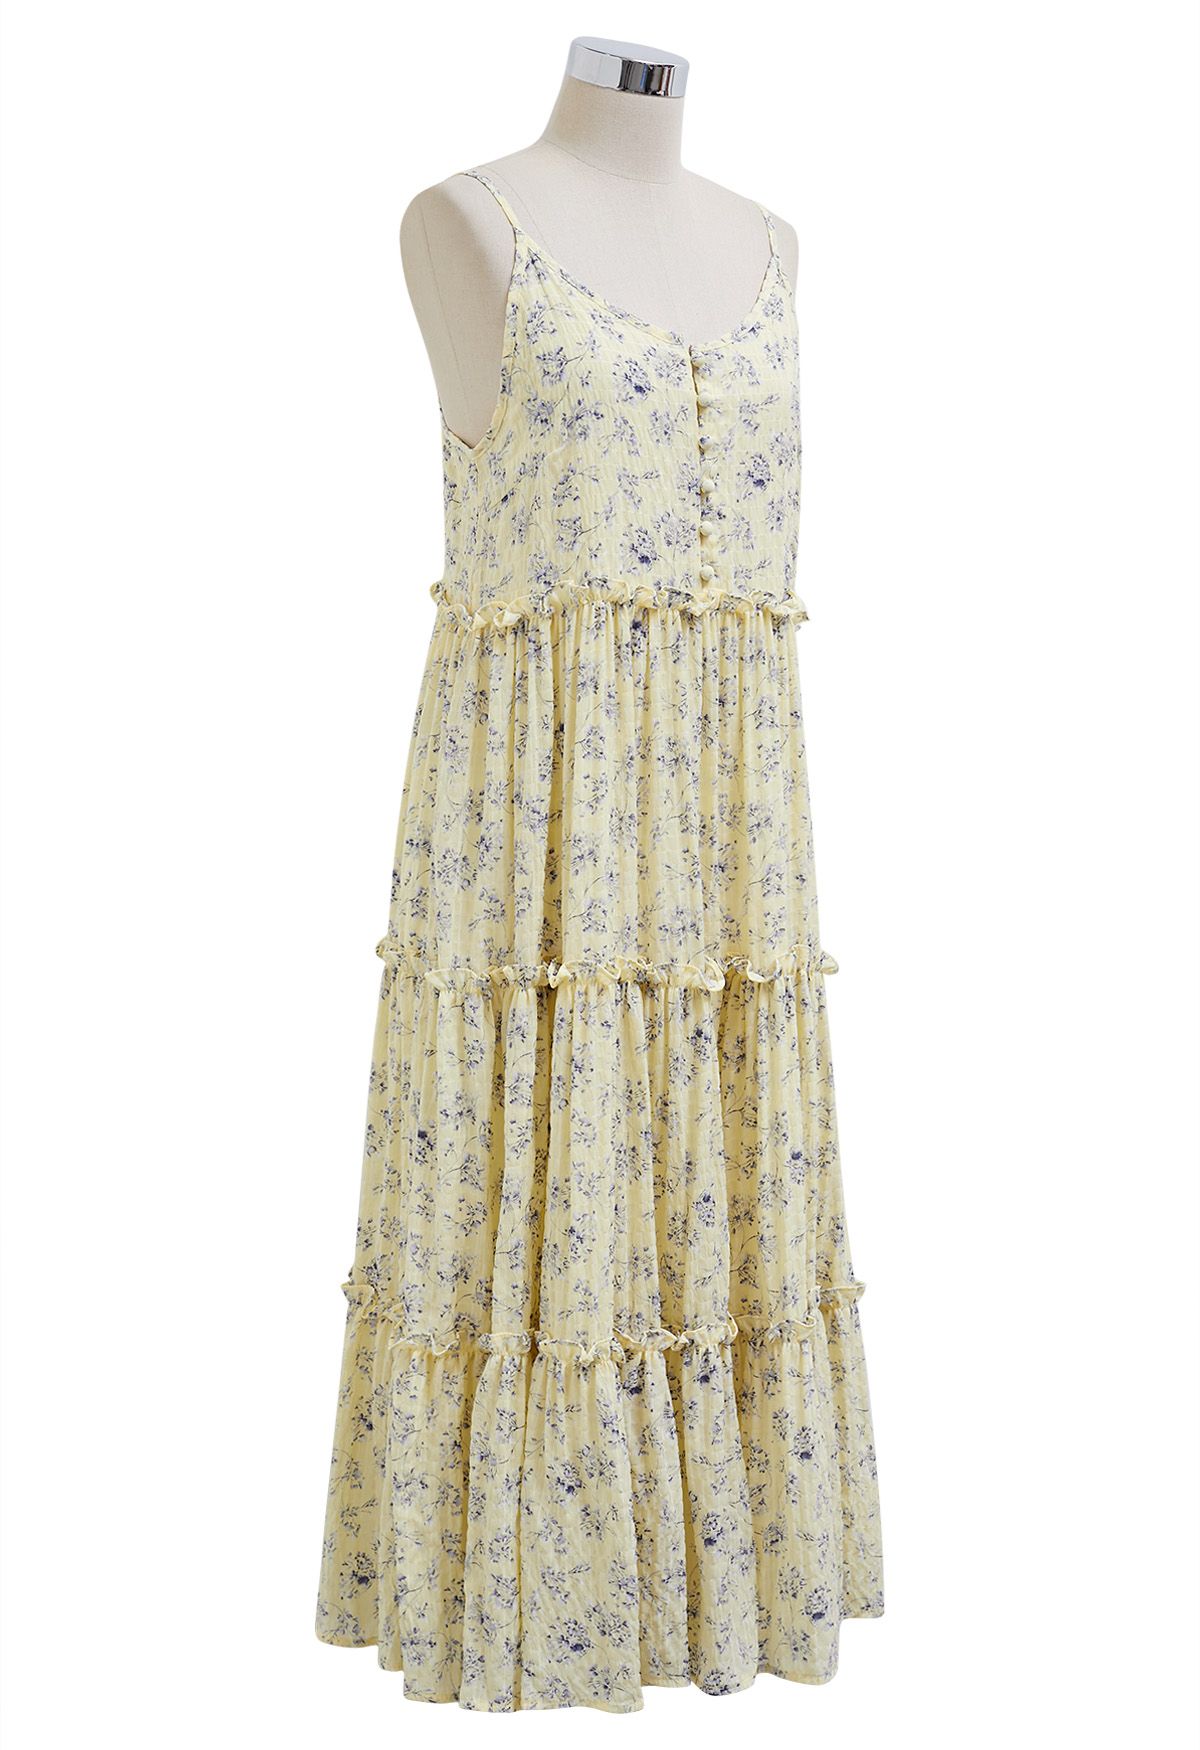 Floral Front Buttoned Ruffled Trim Cami Midi Dress in Light Yellow